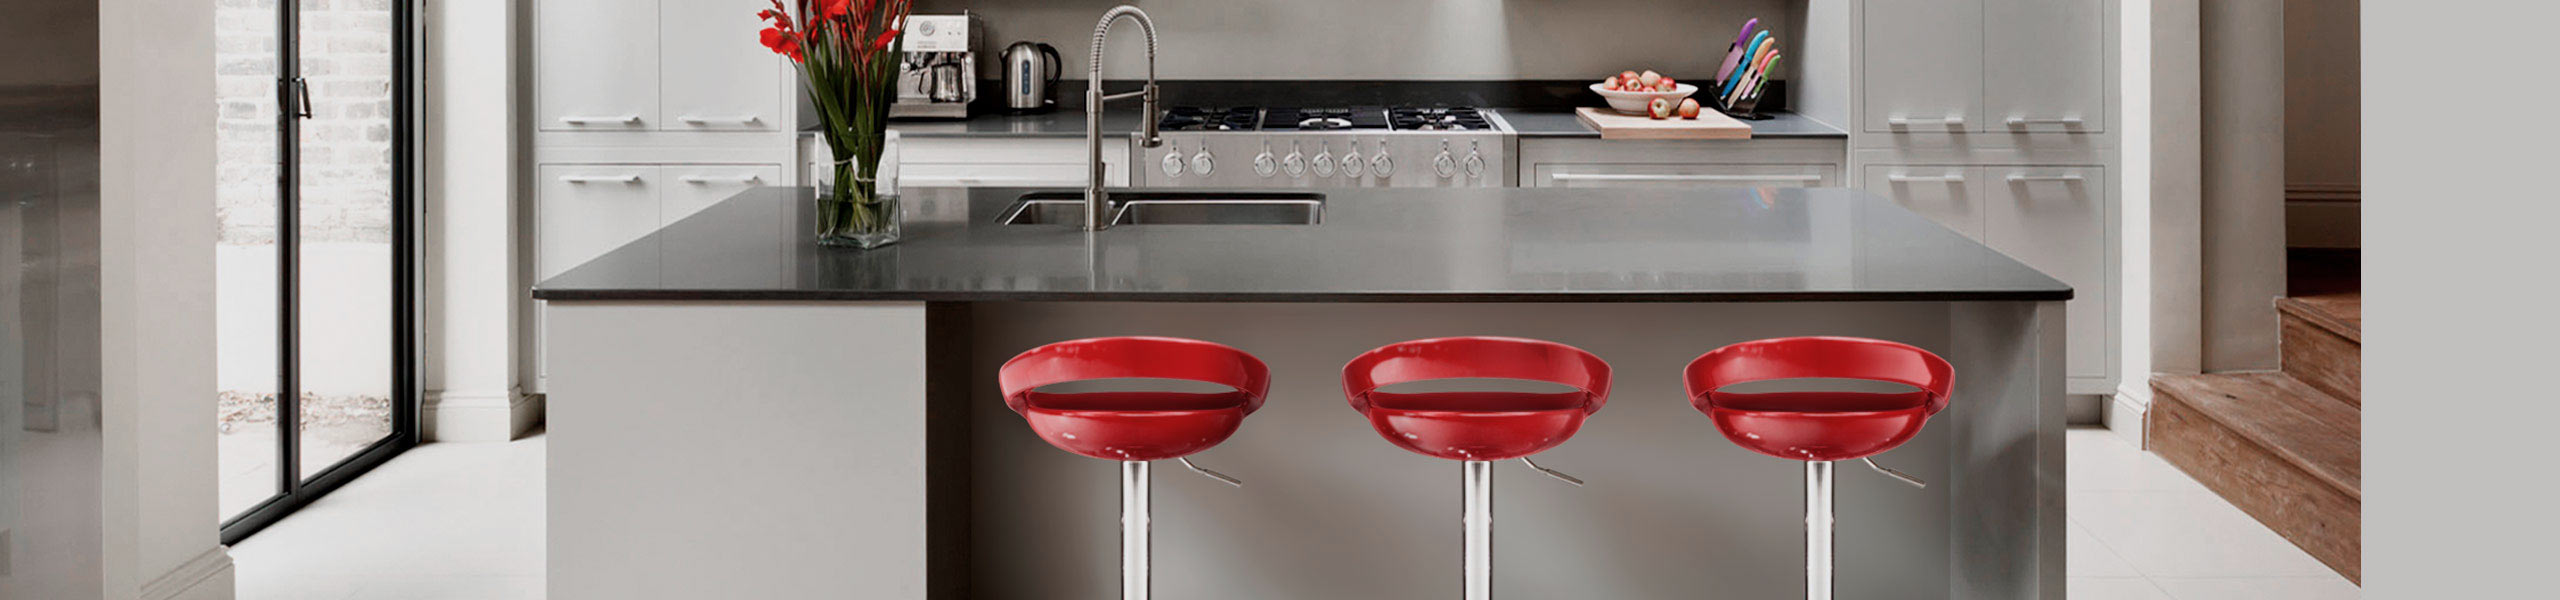 Crescent Bar Stool Red Video Banner